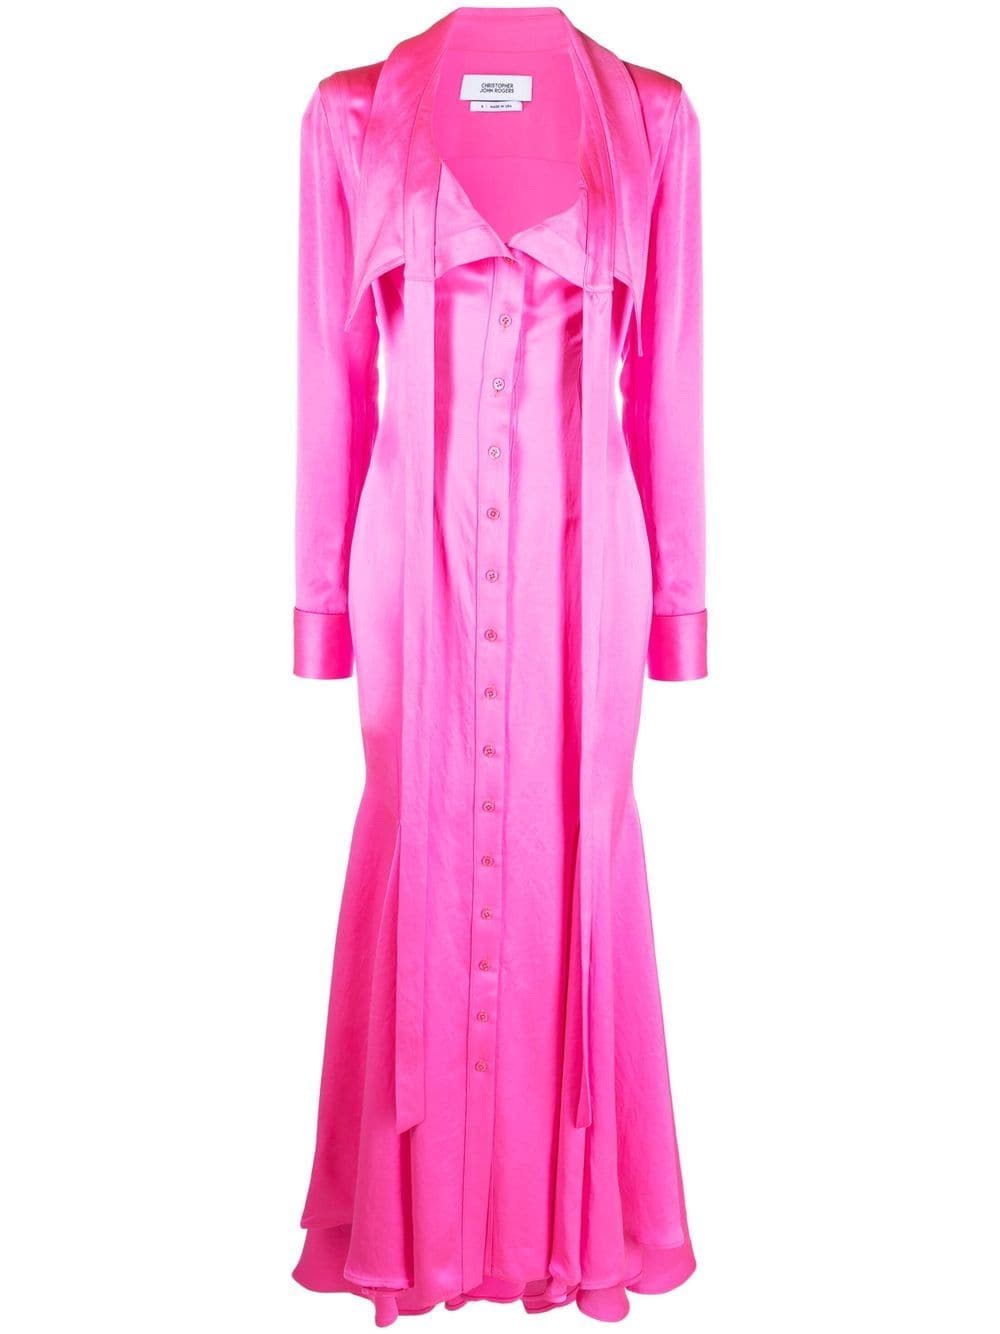 Christopher John Rogers plunge-style flared maxi dress - Pink von Christopher John Rogers